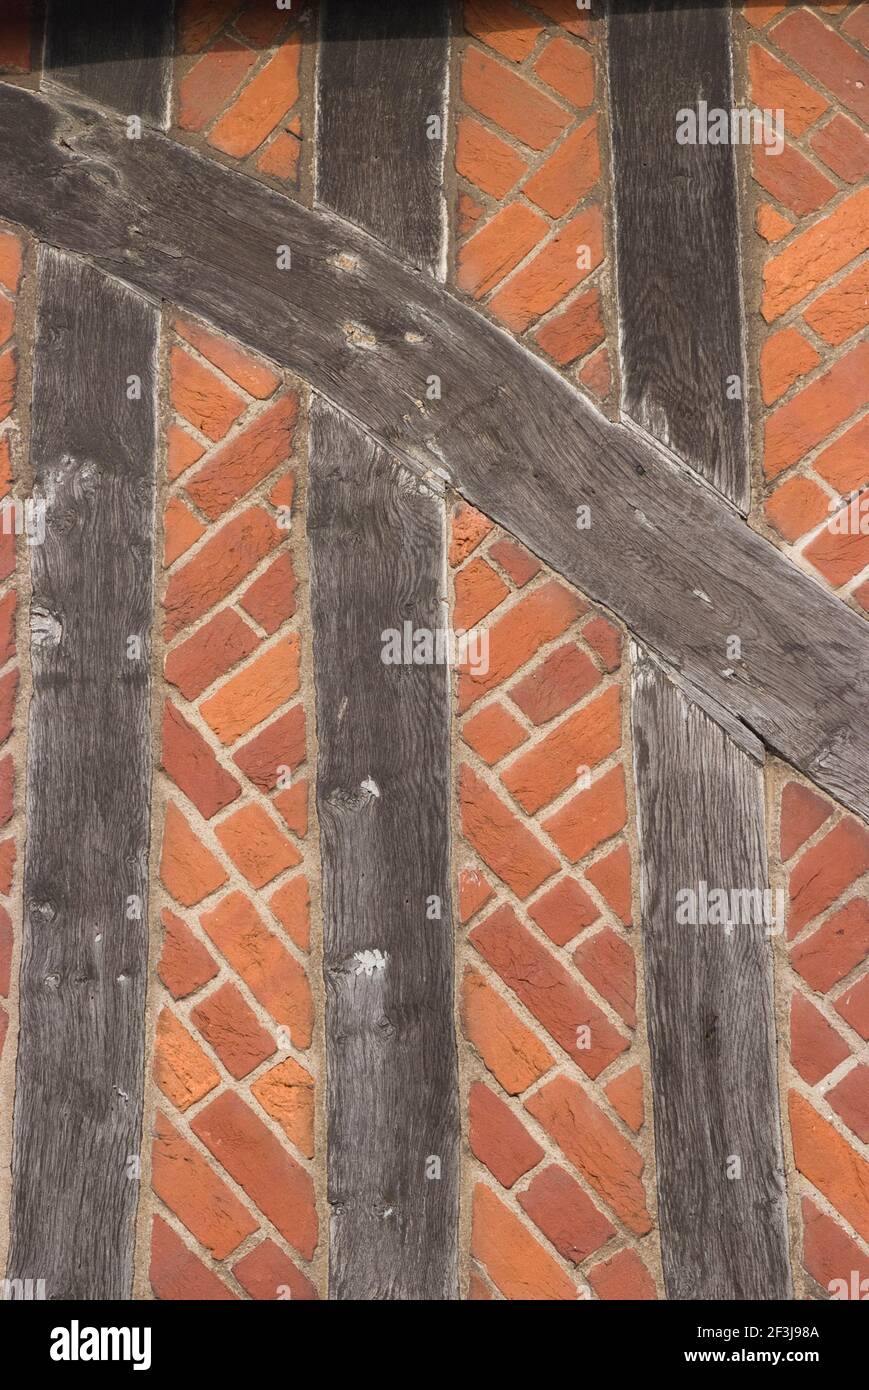 Diagonally oriented bricks and half-timbered frame of the Elizabethan Moot House Town Hall, Aldeburgh, Suffolk, England | NONE | Stock Photo